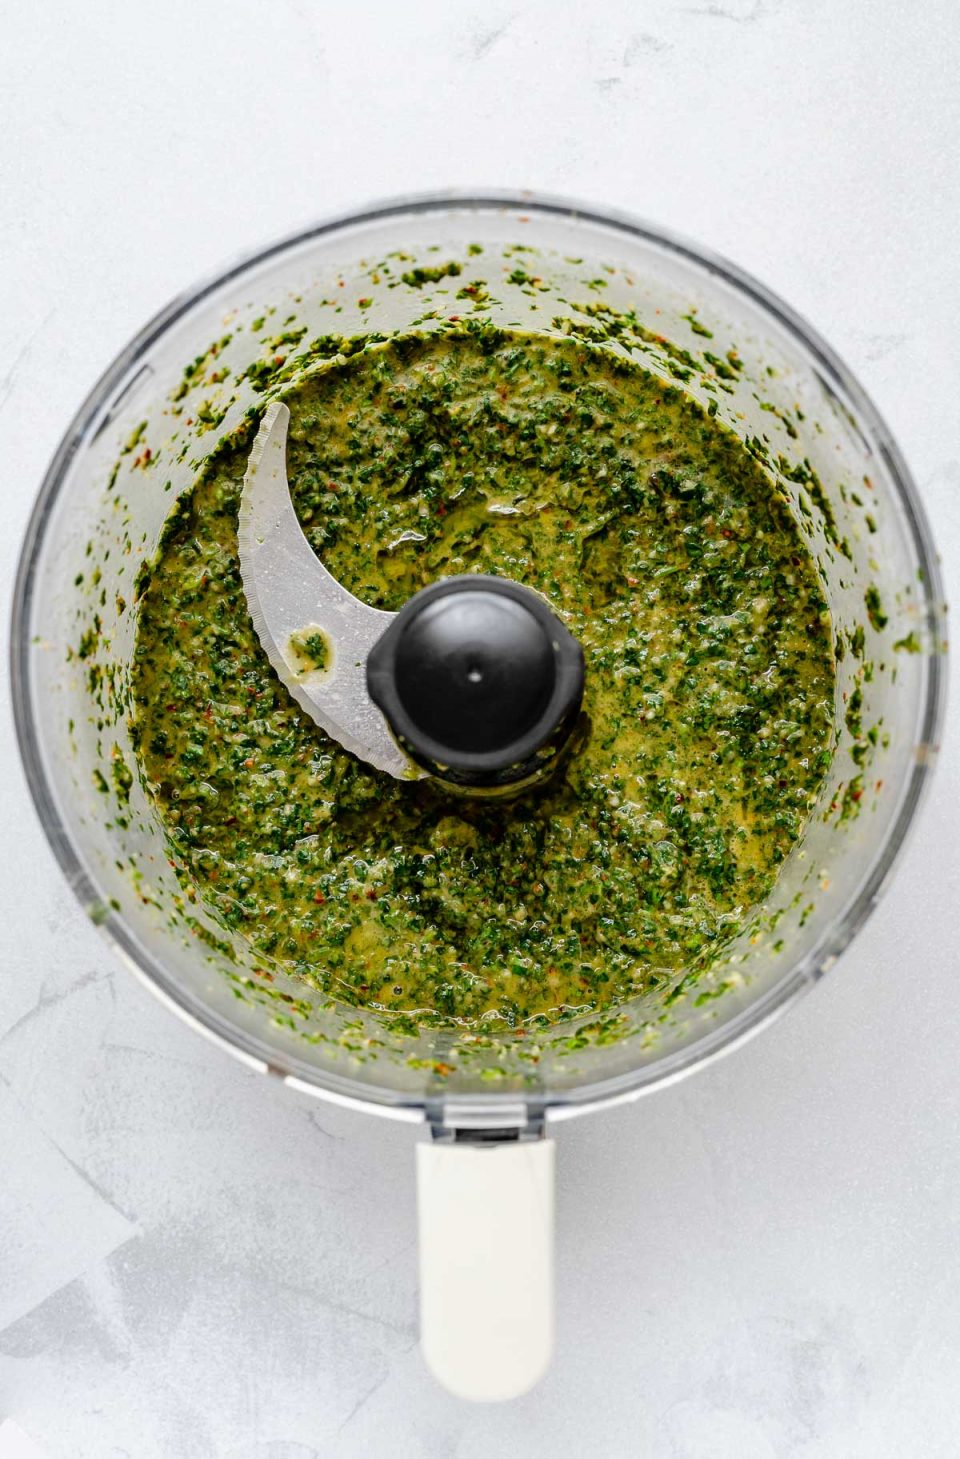 A top down photo of easy Chimichurri sauce that has been pulsed in a food processor bowl. The bowl sits on a light gray surface.